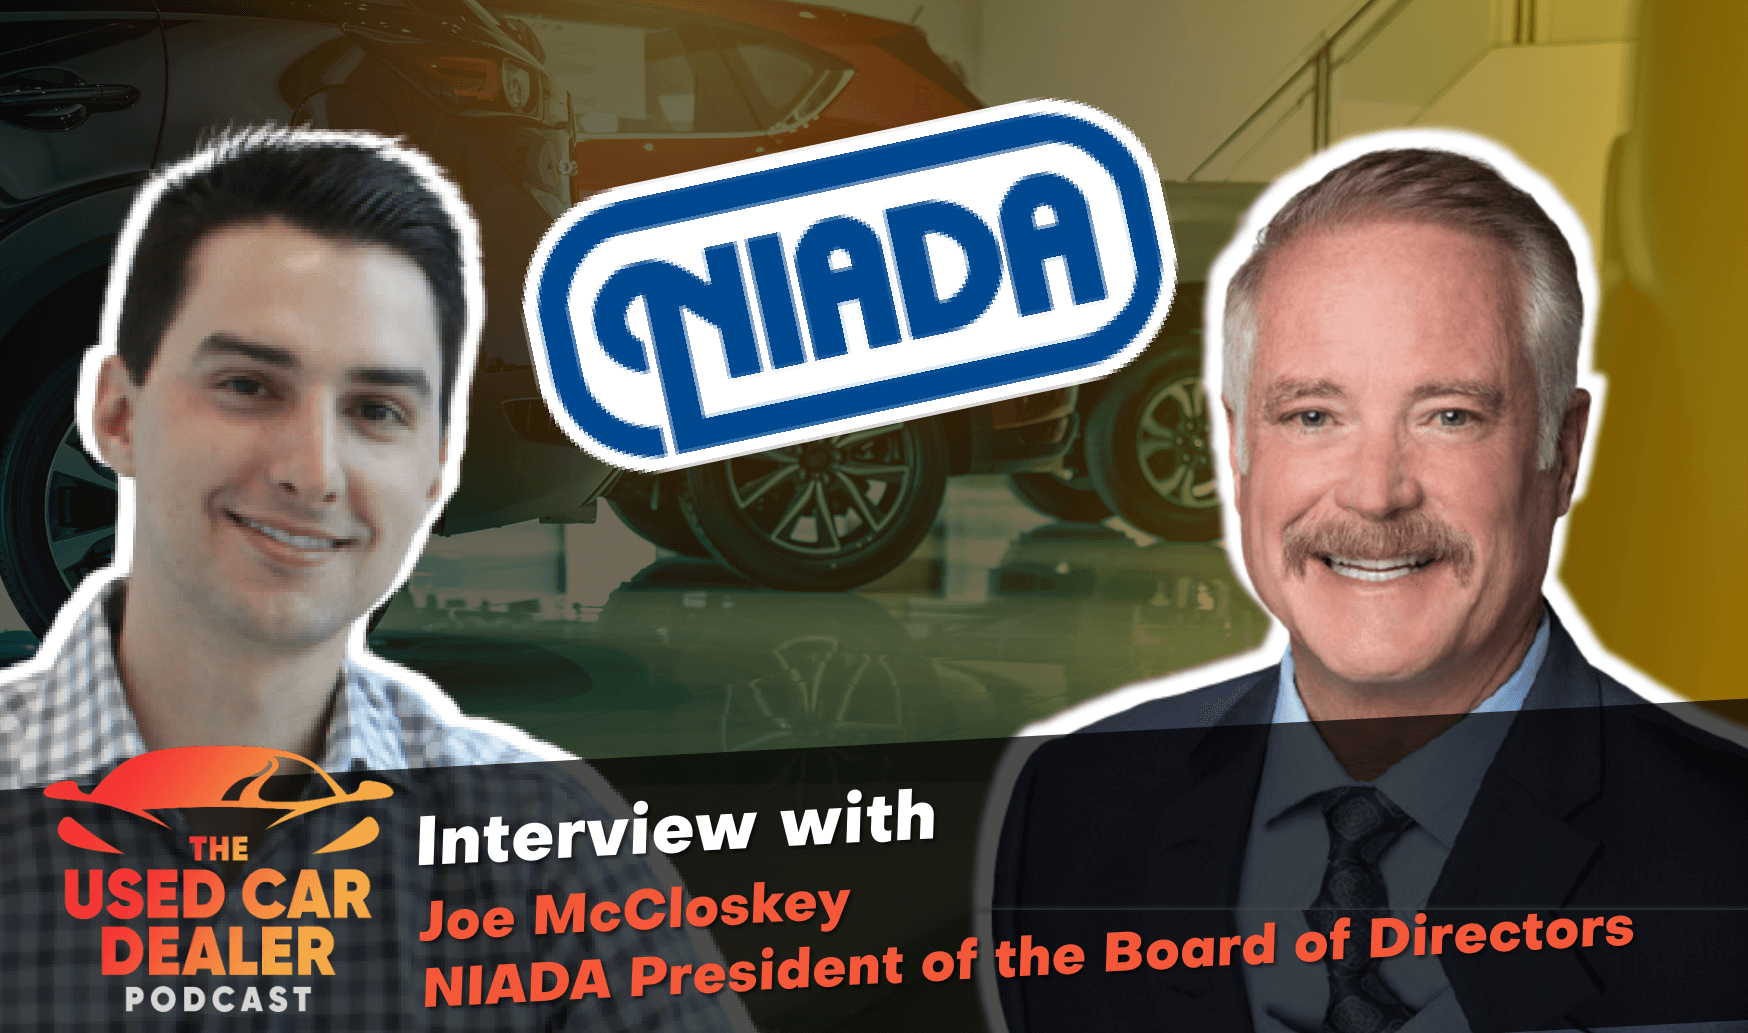 Interview with Joe McCloskey on 50 years in the used car business